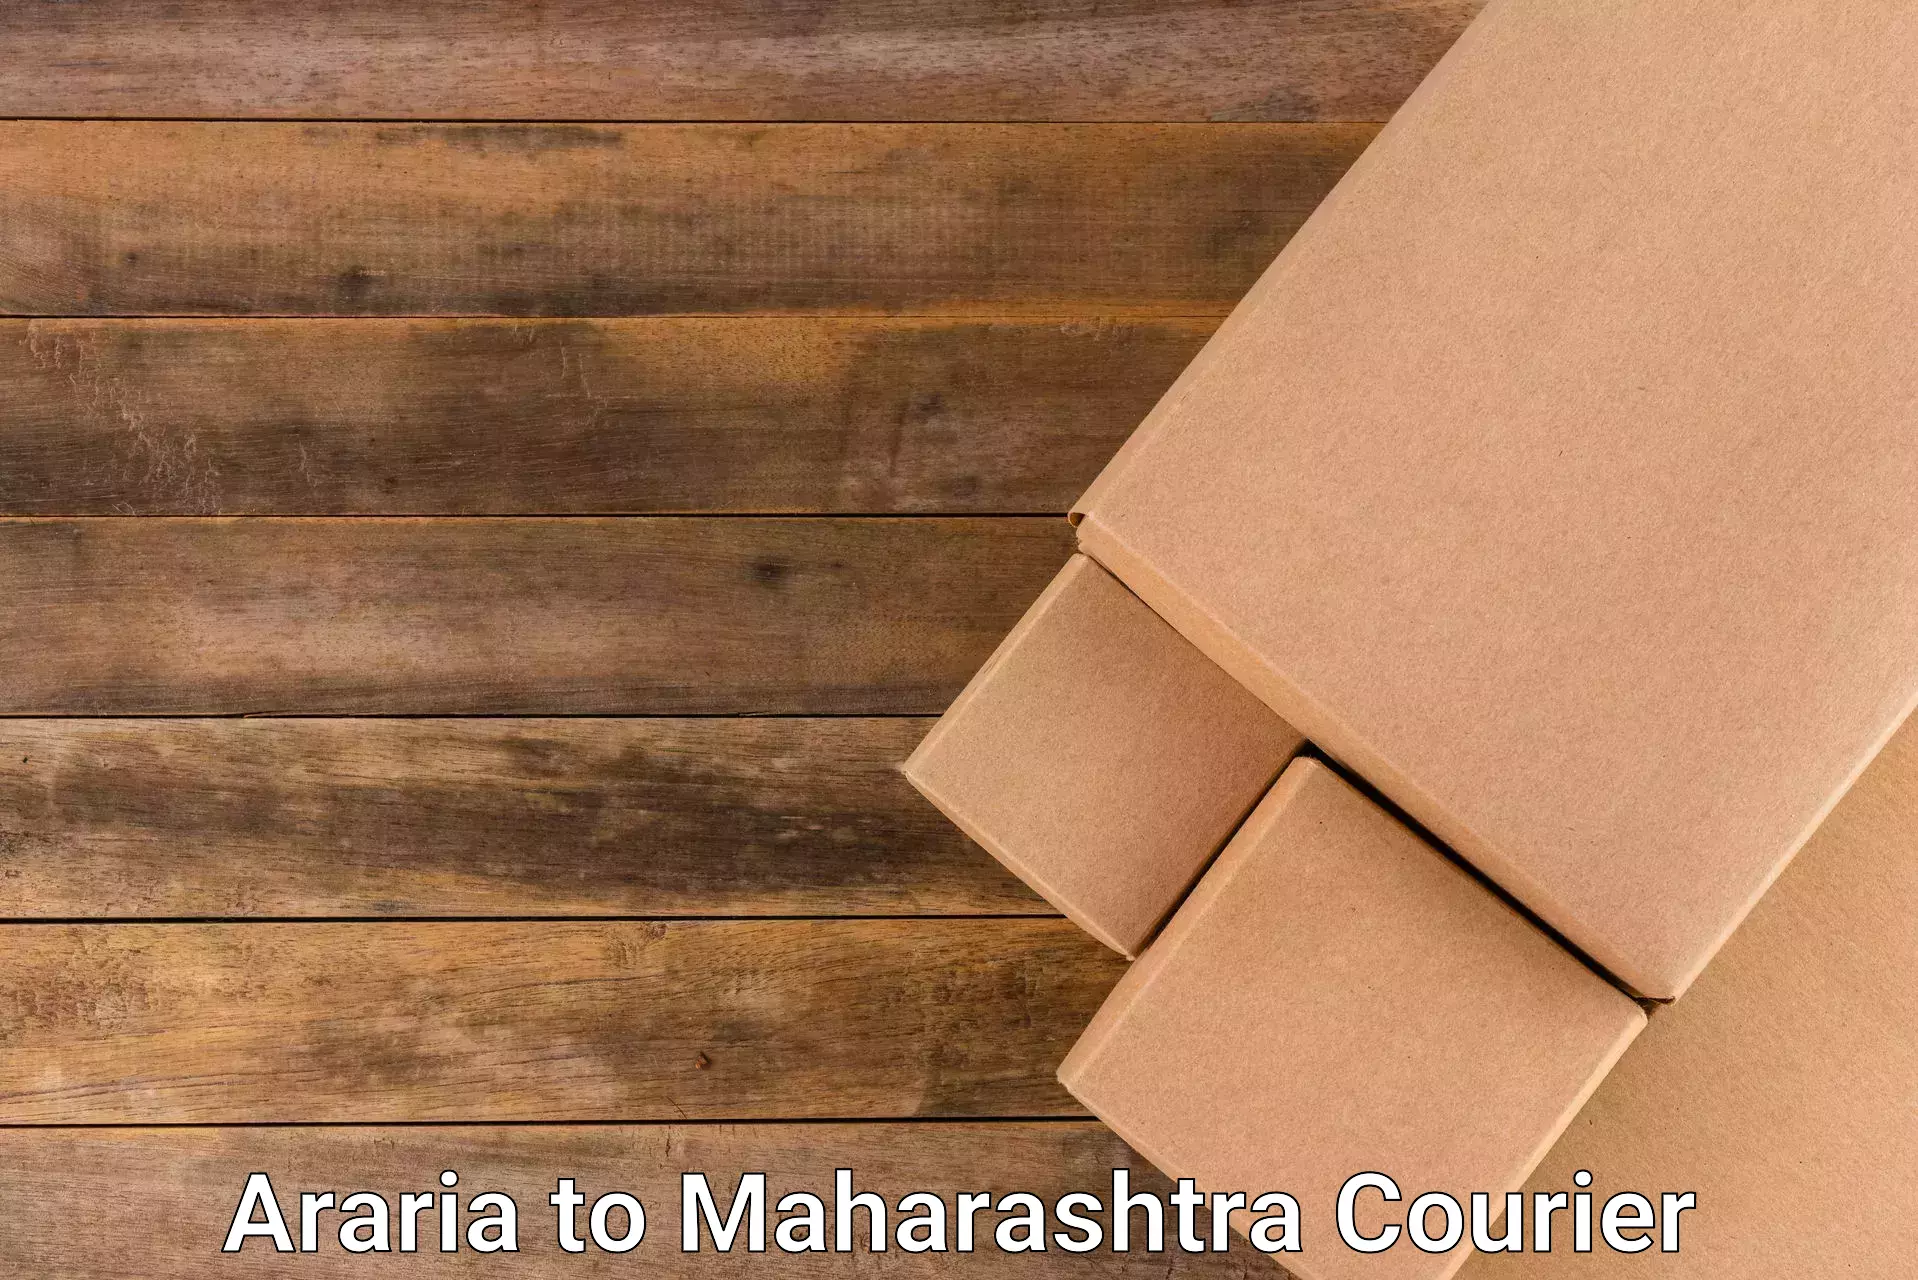 State-of-the-art courier technology Araria to Bhoom